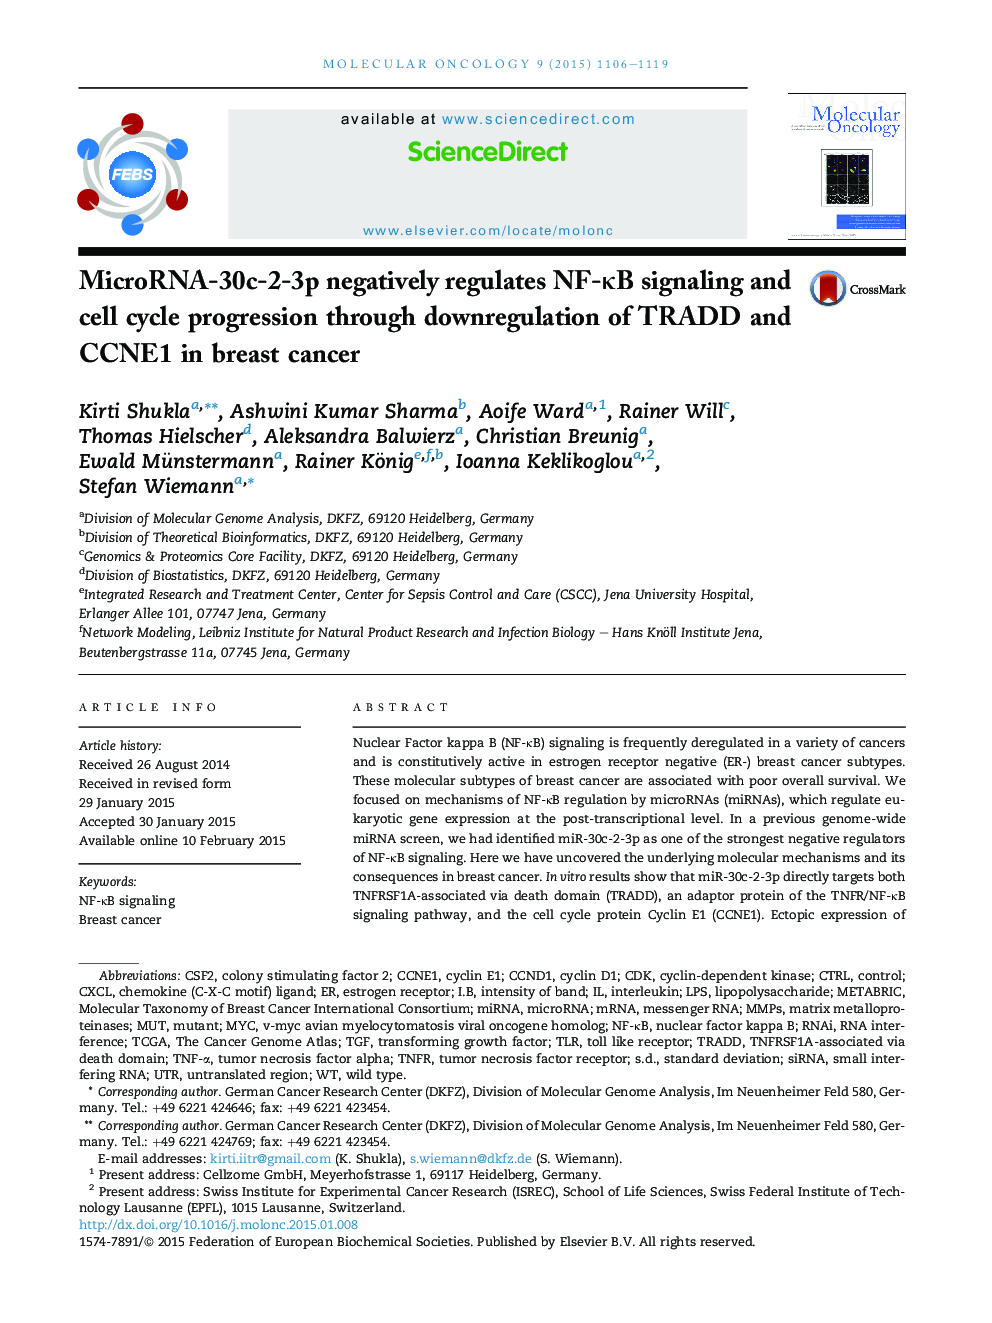 MicroRNA-30c-2-3p negatively regulates NF-ÎºB signaling and cell cycle progression through downregulation of TRADD and CCNE1 in breast cancer